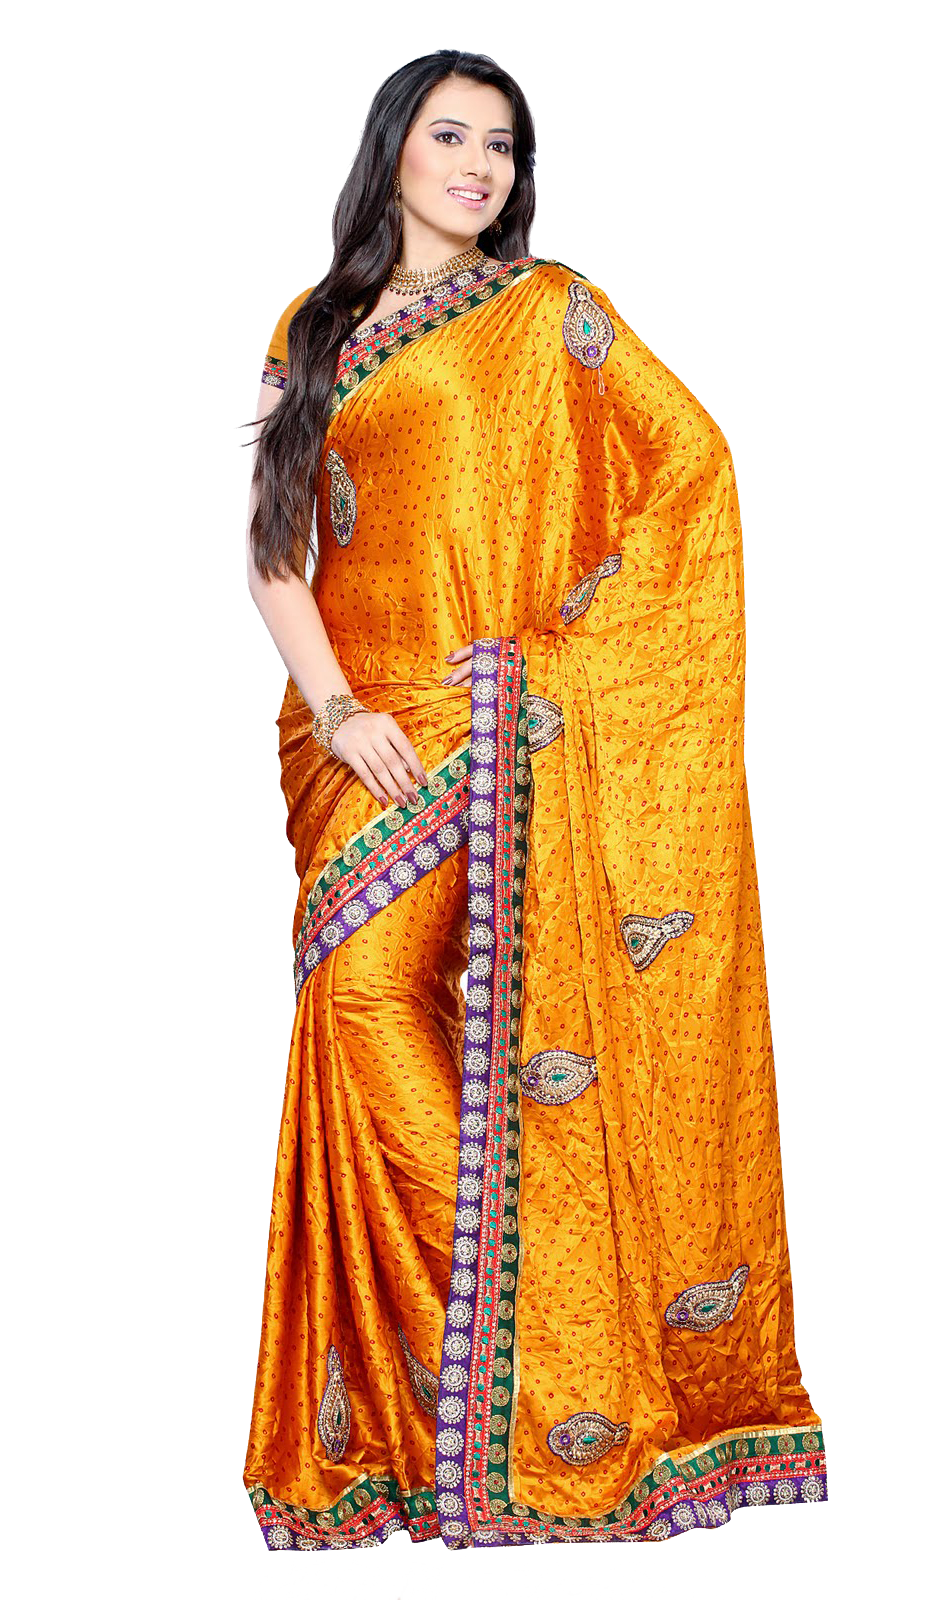  Indian  saree Model  PNG File by TheArtist100 on DeviantArt